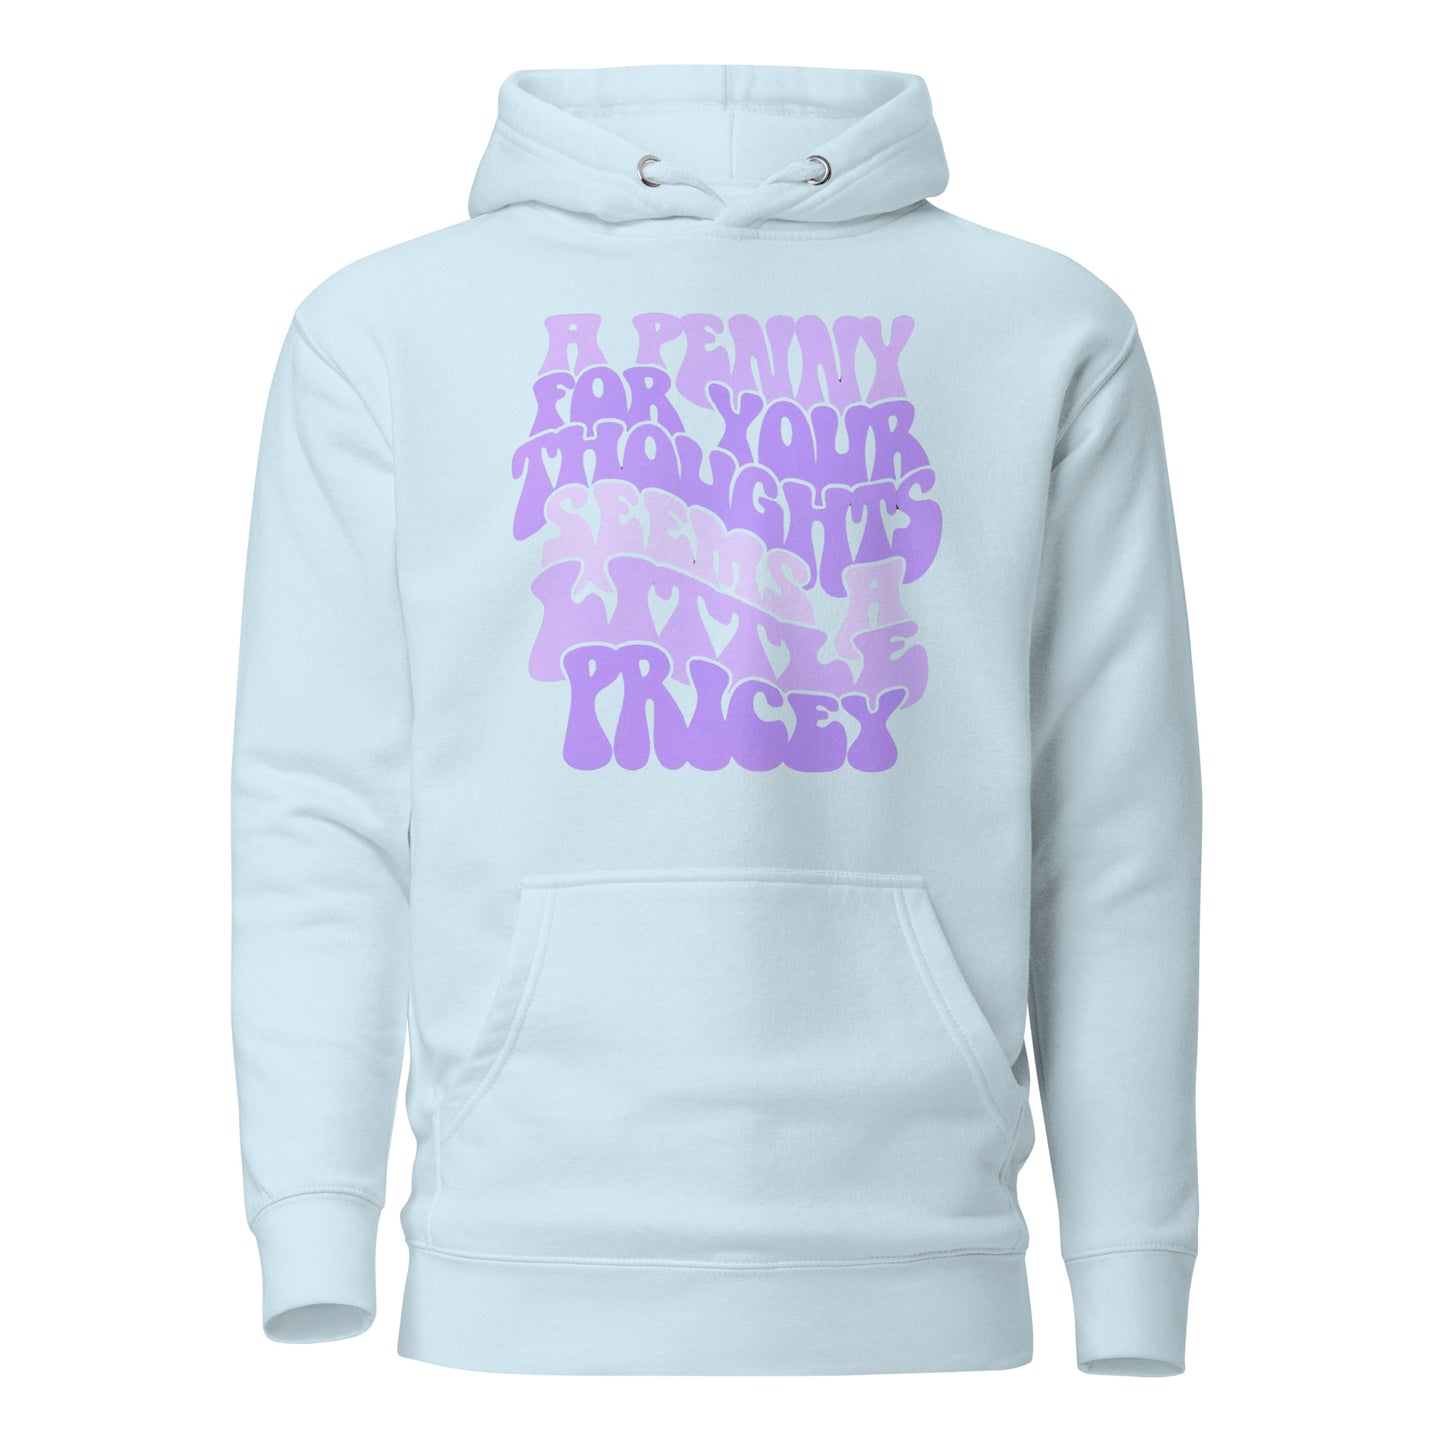 A Penny For Your Thoughts Seems A Little Pricey Cotton Heritage Adult Hoodie